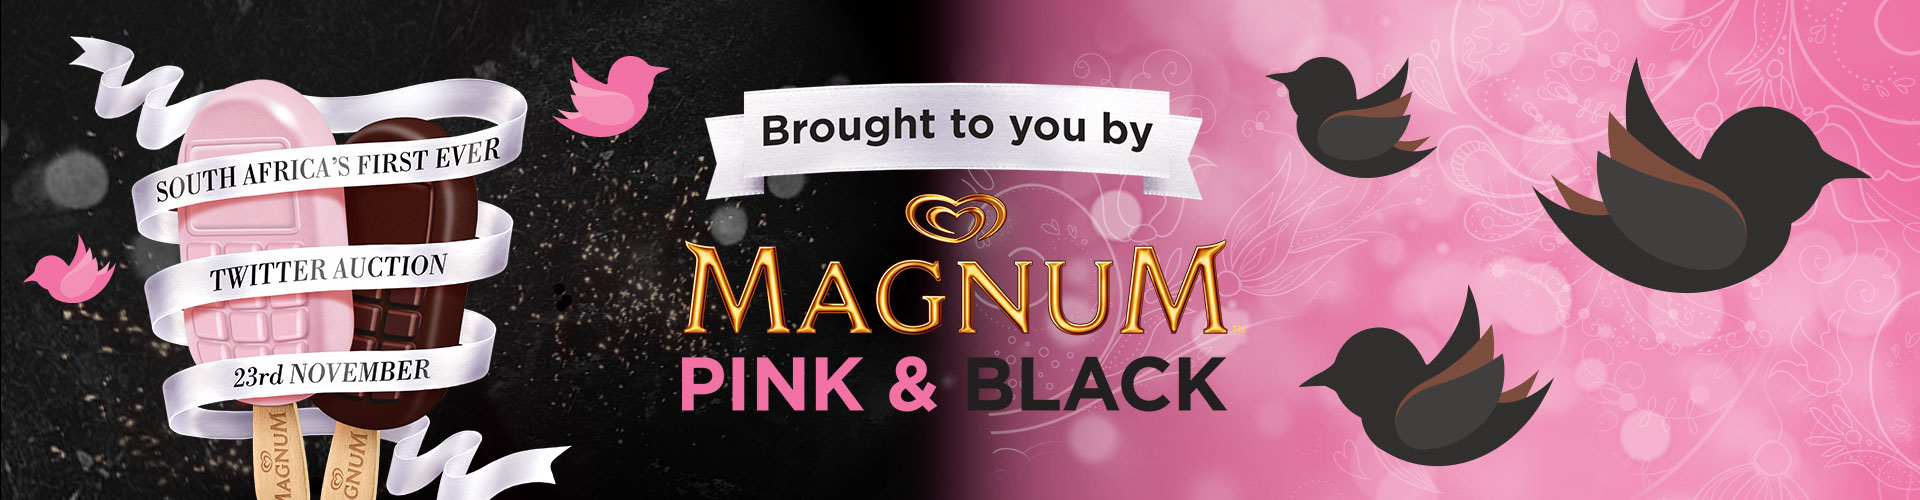 Magnum Pink & Black ‘Turning Tweets Into Currency’